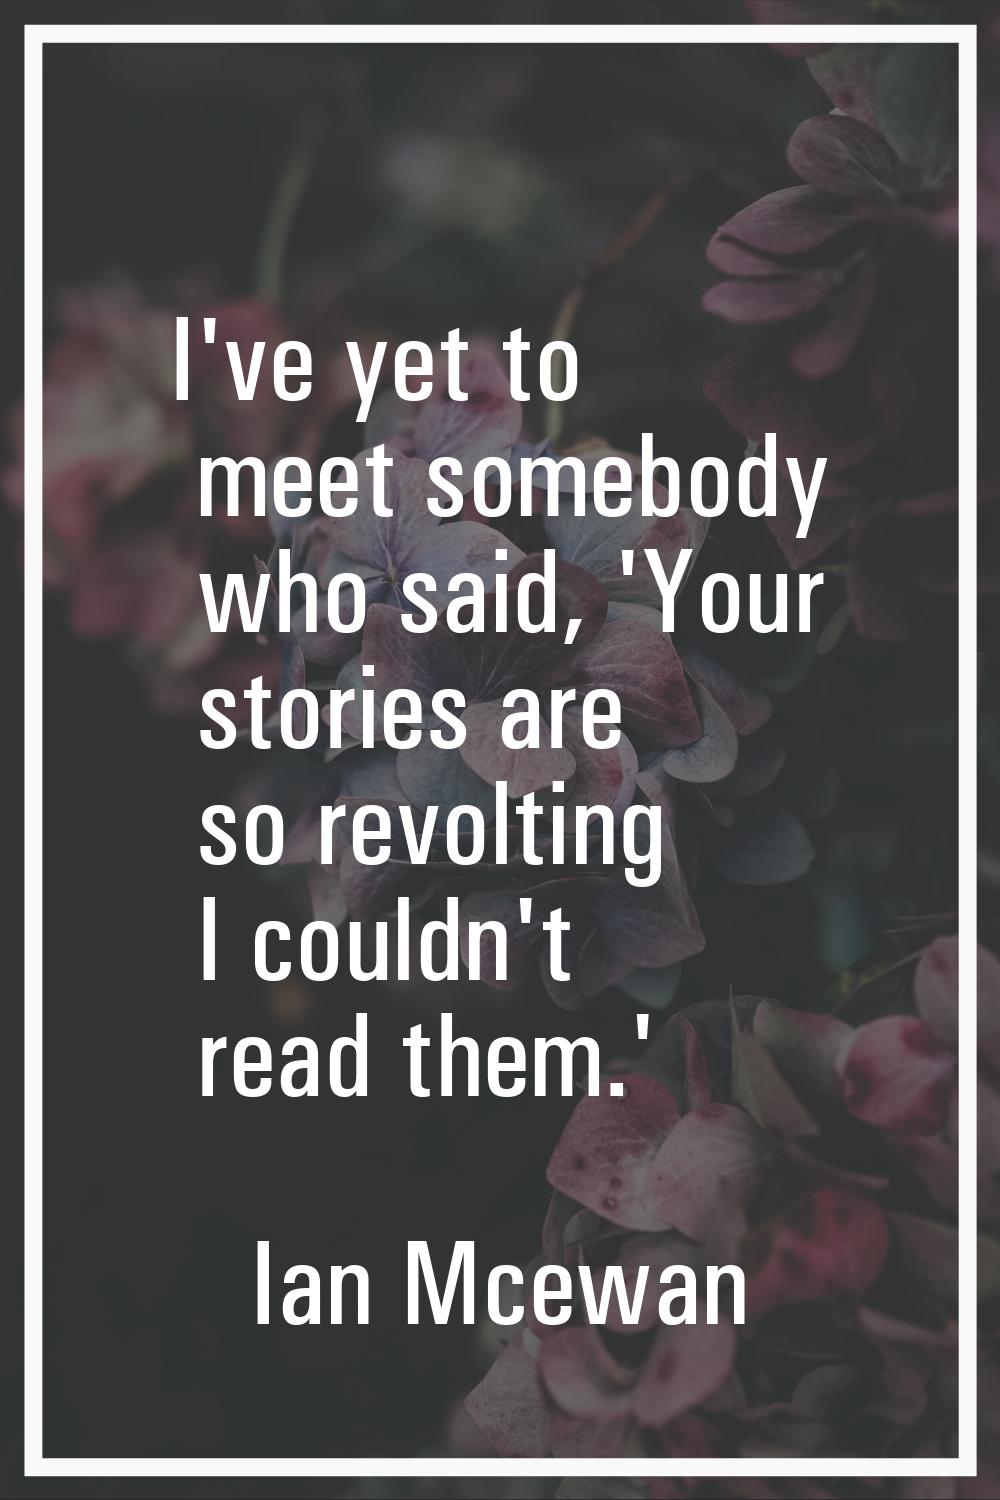 I've yet to meet somebody who said, 'Your stories are so revolting I couldn't read them.'